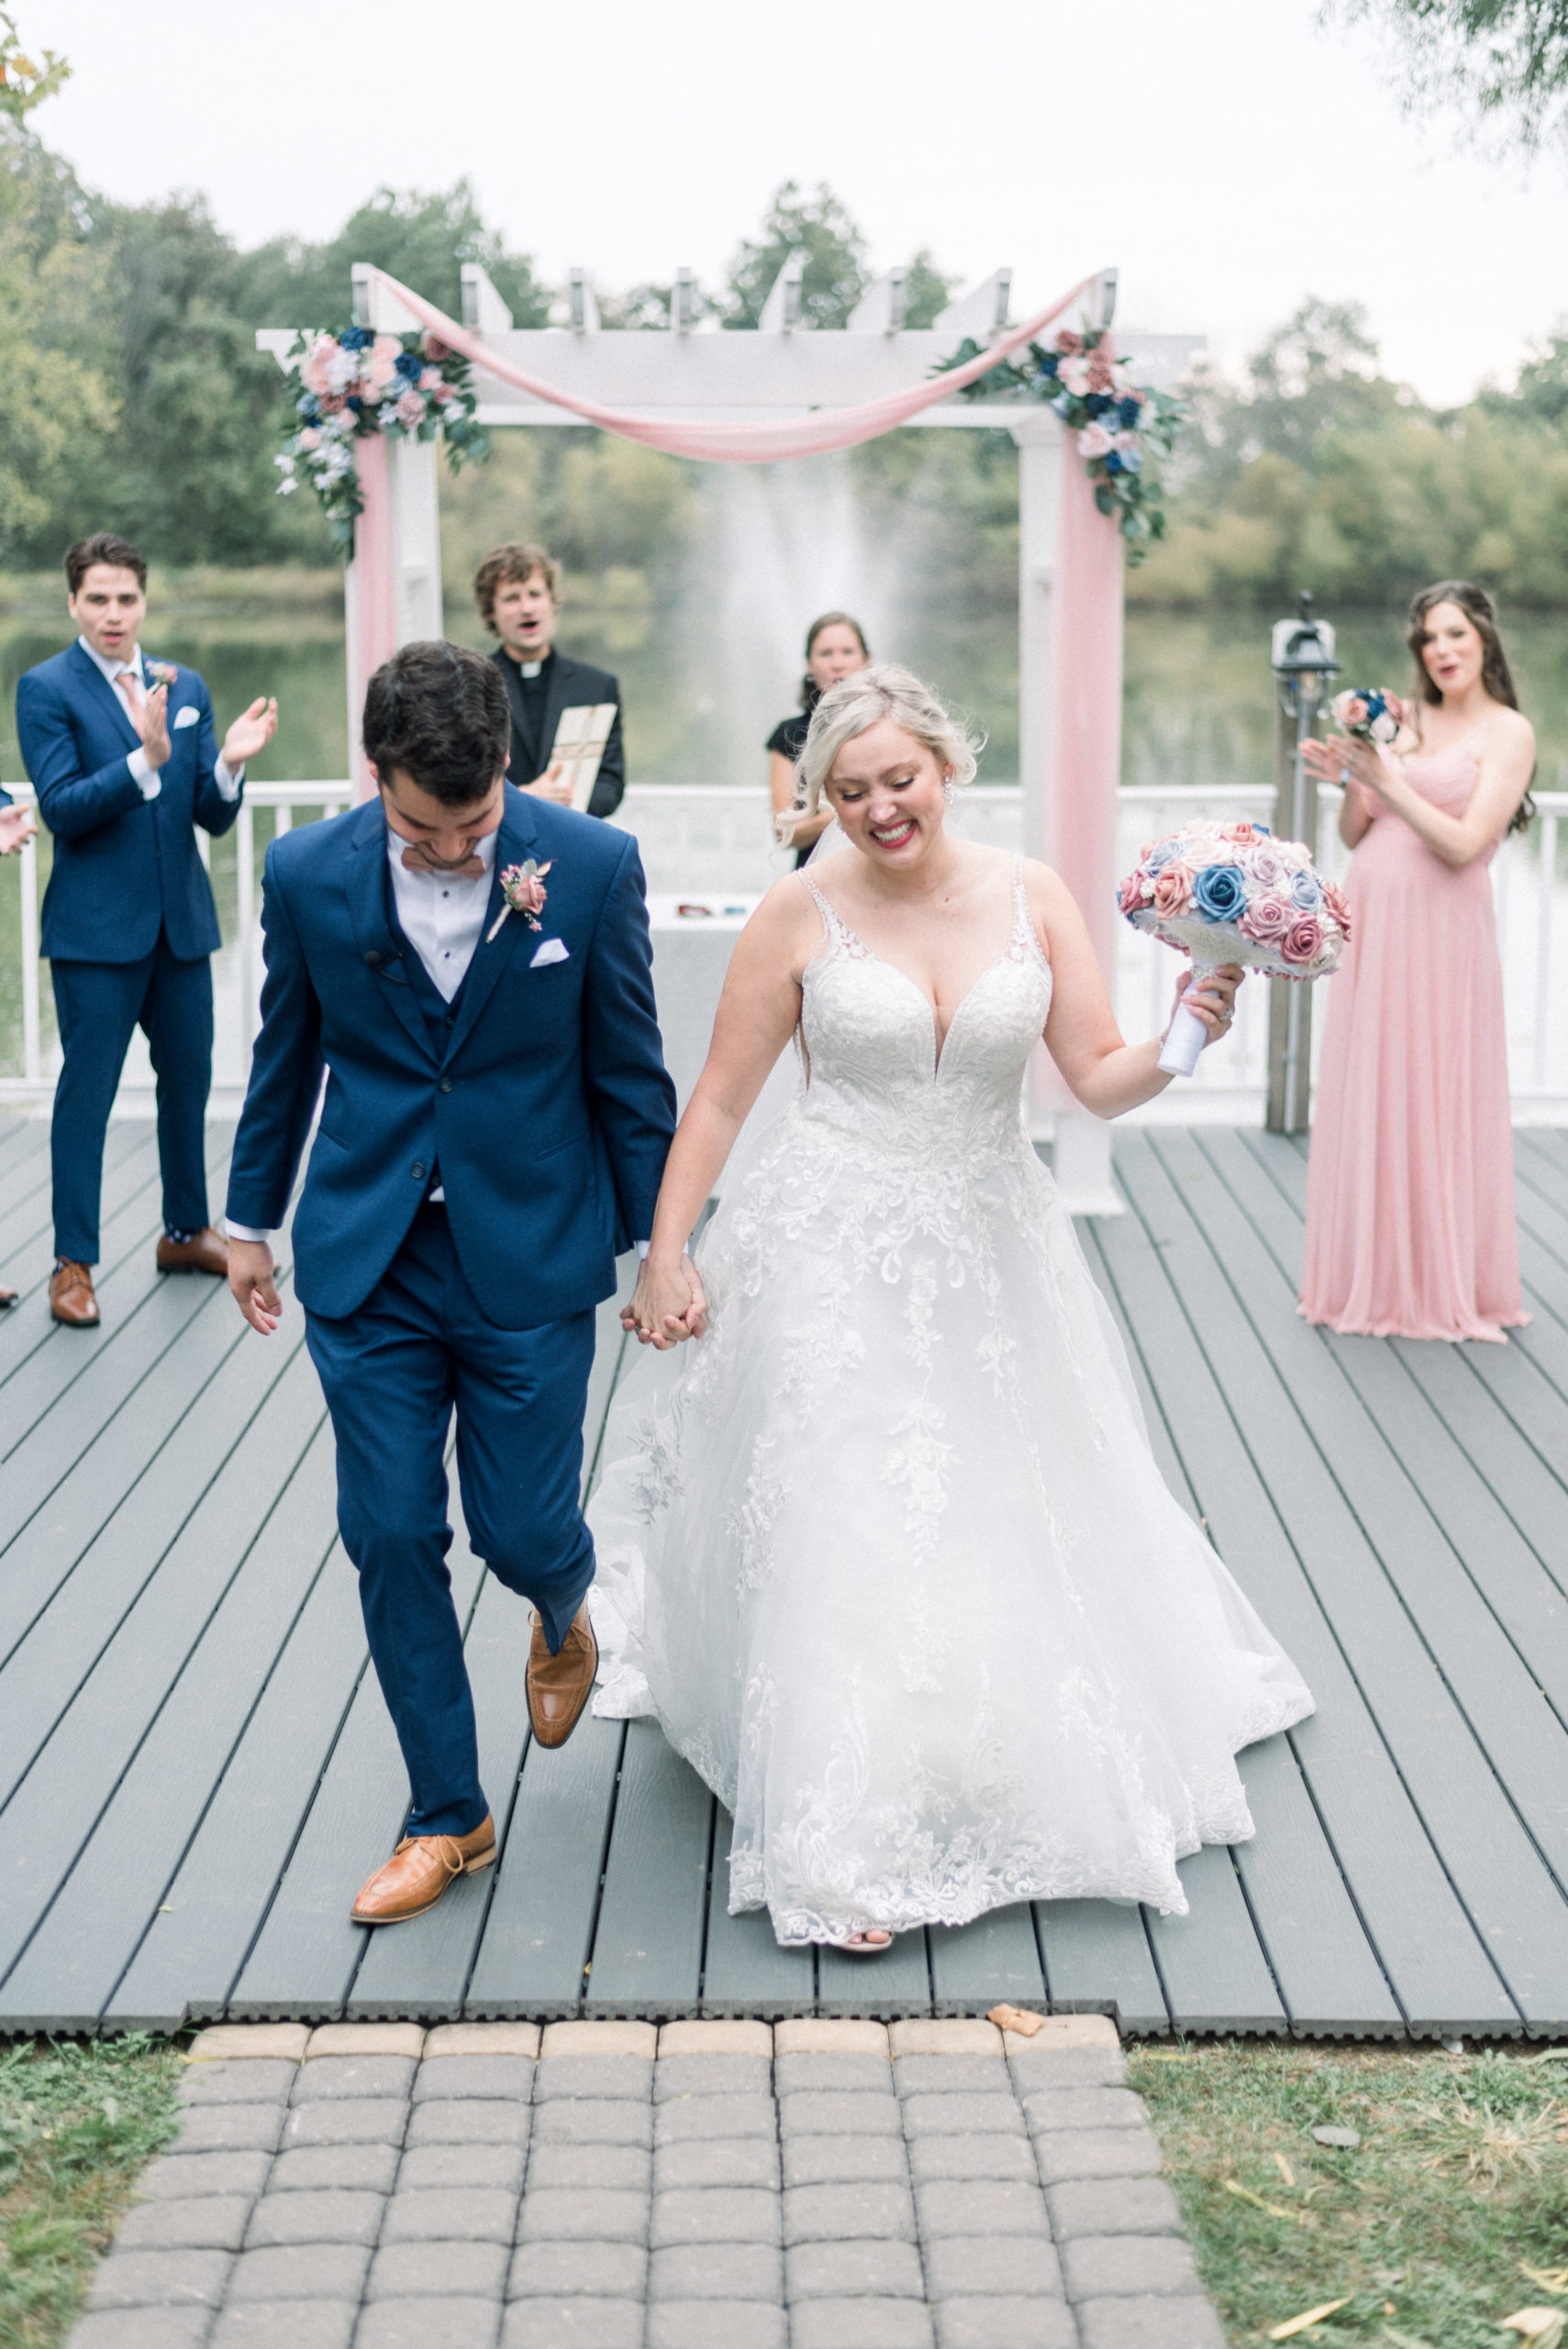 wedding couple celebrating recent marriage and walking out of ceremony hand in hand